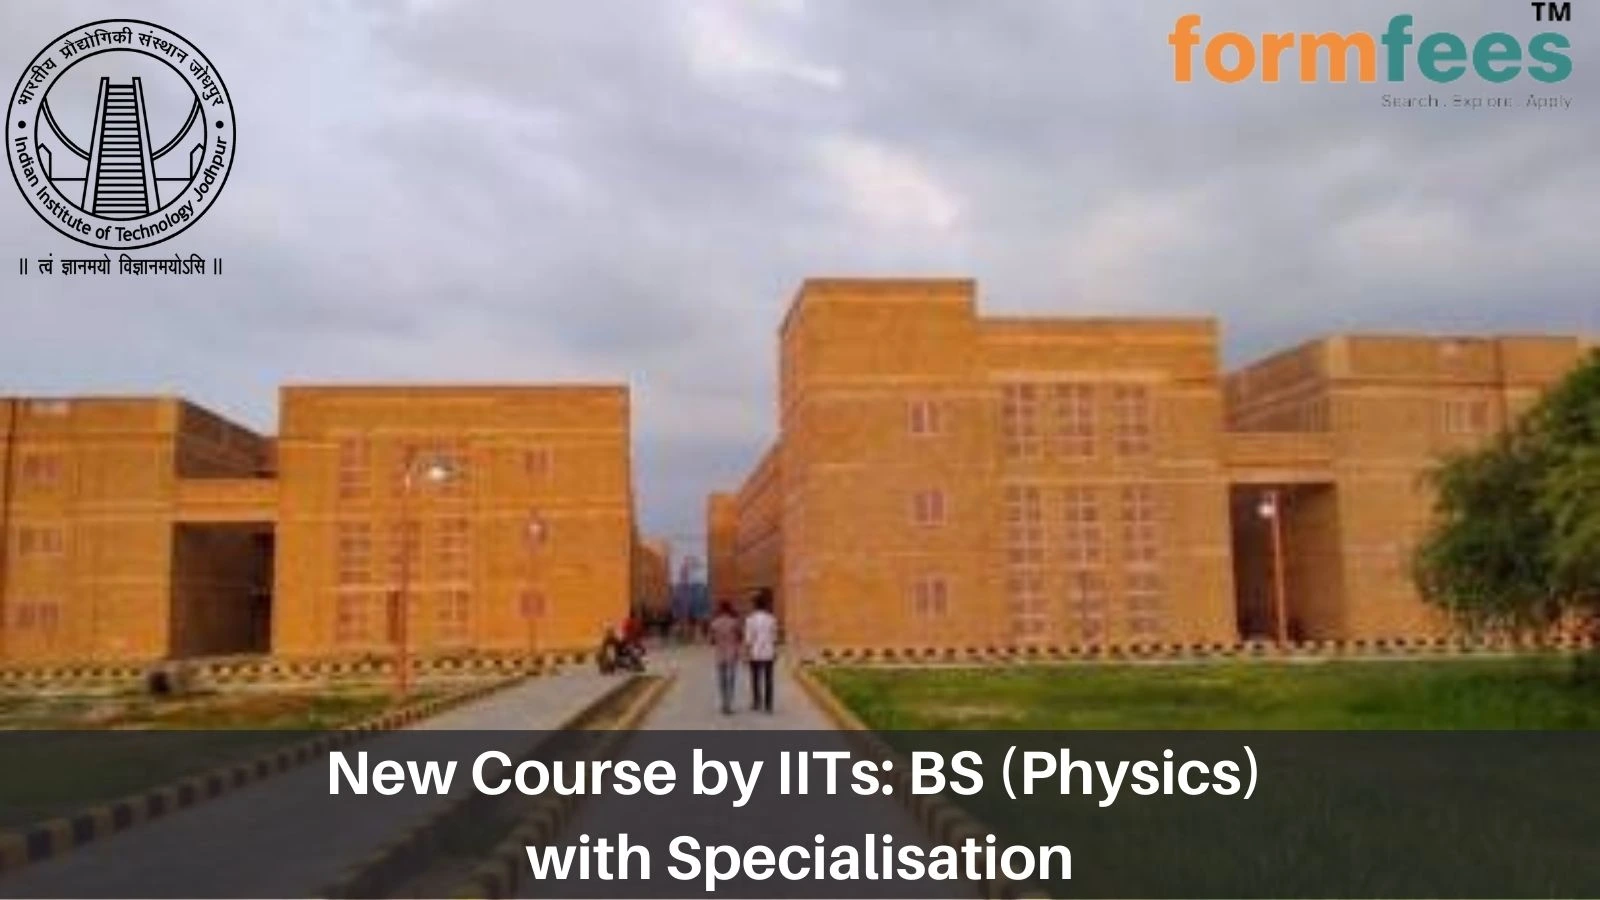 New Course by IITs BS (Physics) with Specialisation